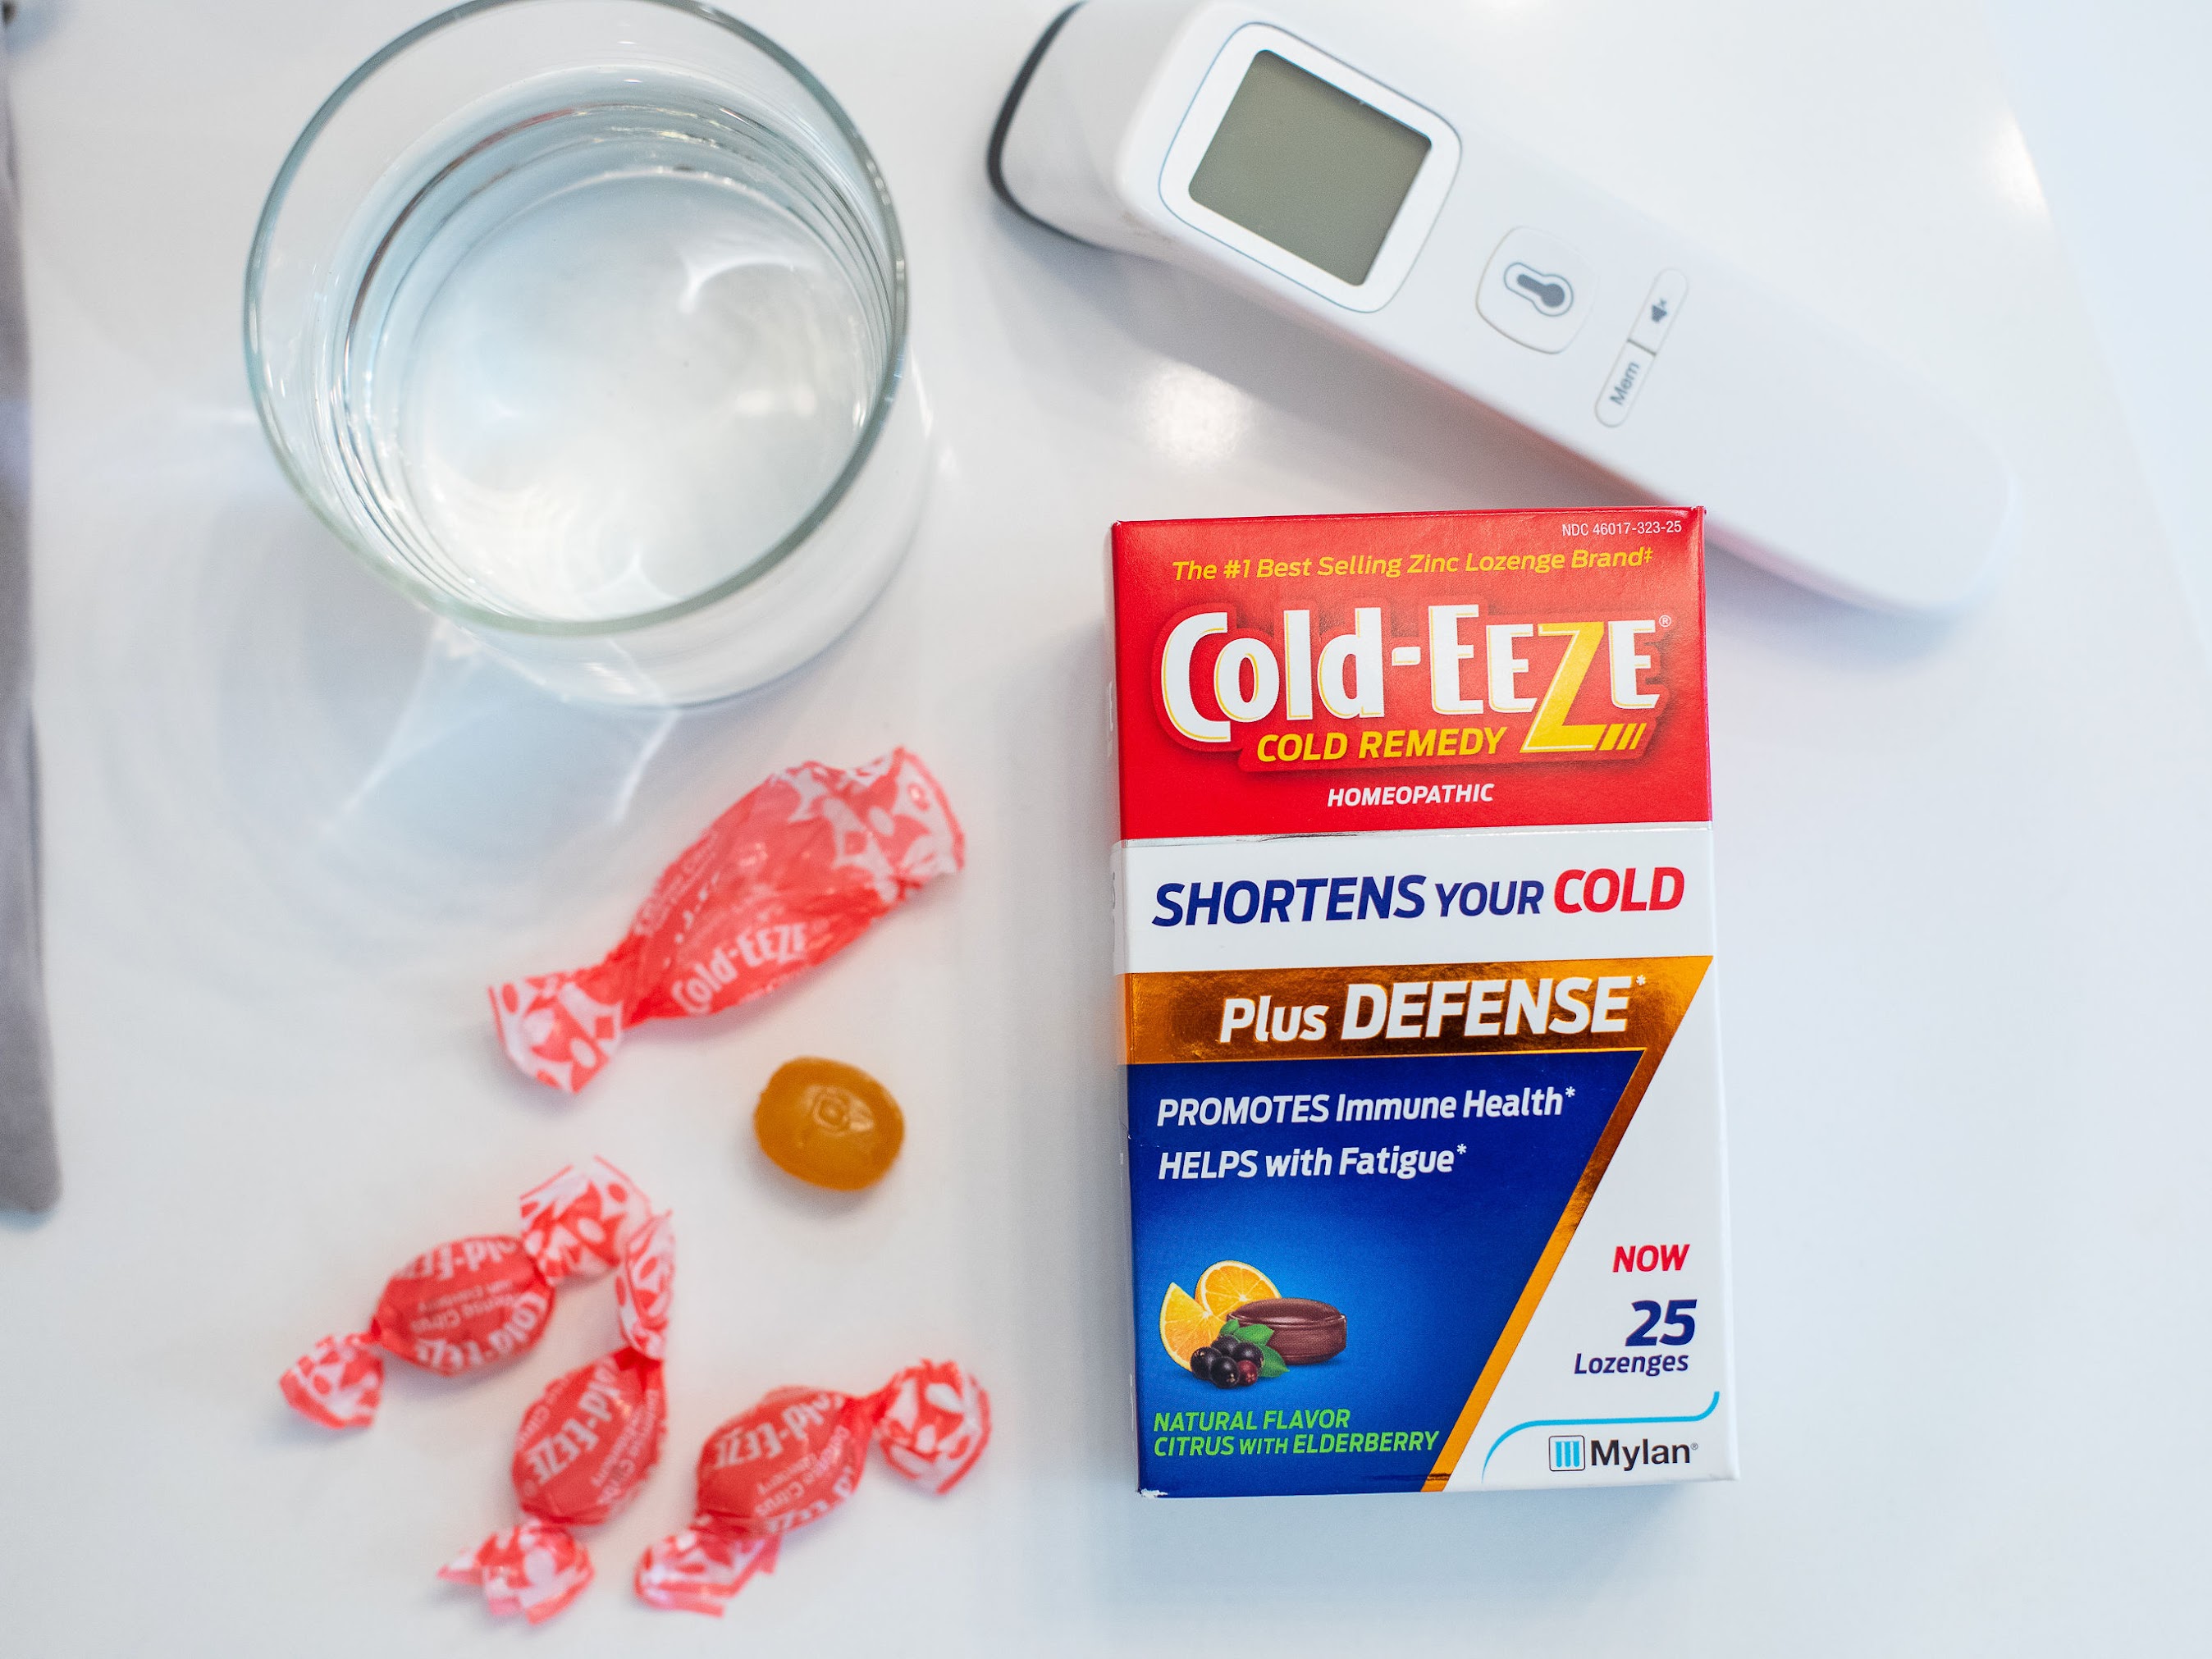 Cold-Eeze As Low As $6.99 At Publix – Stock Up For Cold/Flu Season